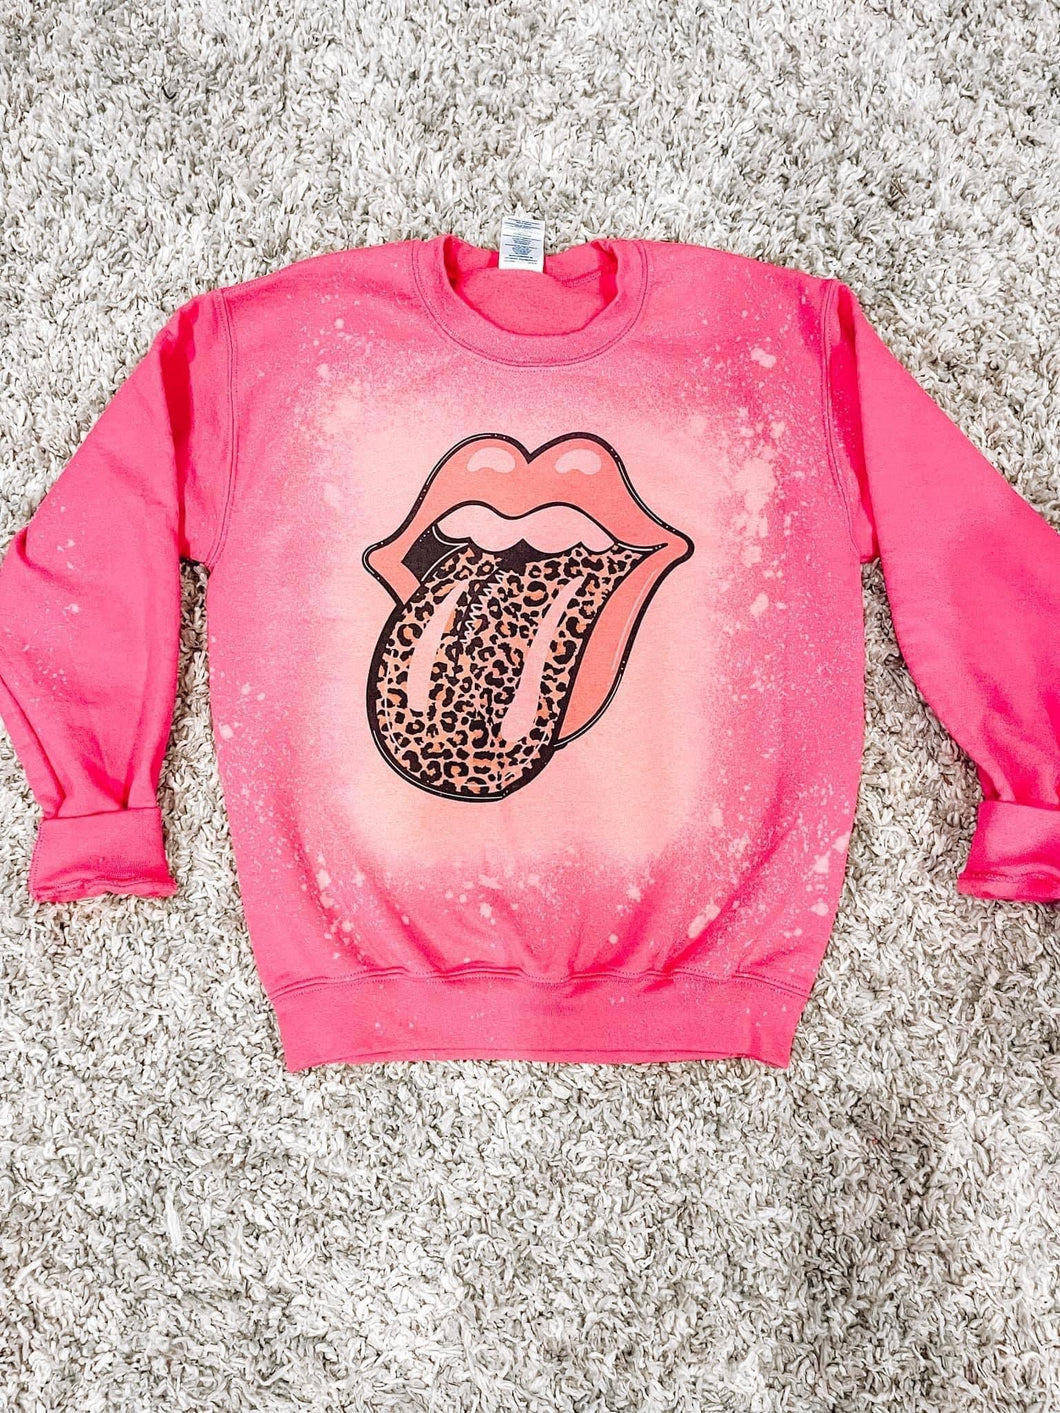 Hot pink tongue bleached crew